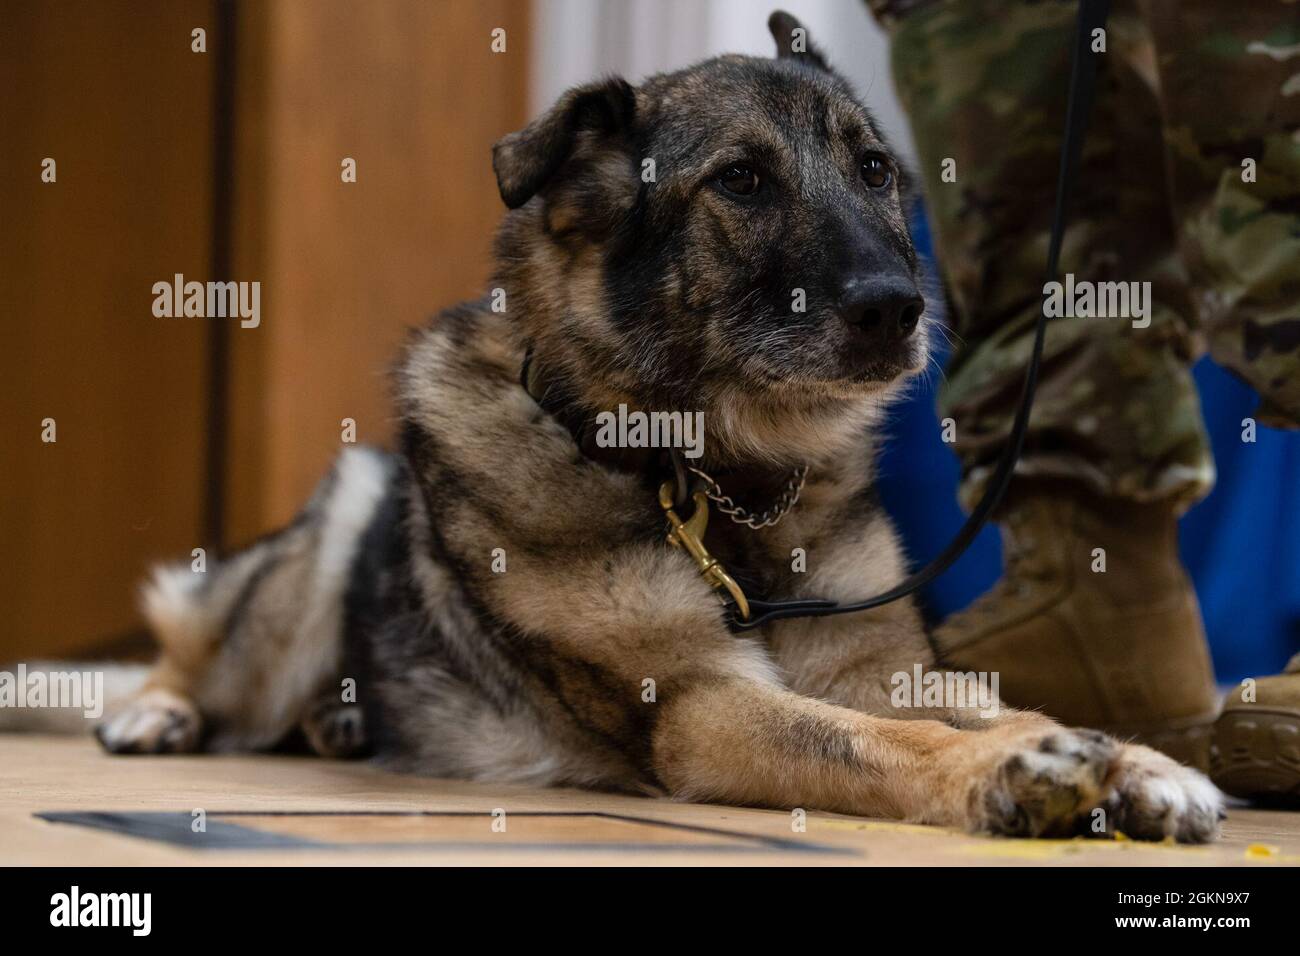 U.S. Air Force Military Working Dog Carla lies down next to her handler at her retirement ceremony at the base theater on Spangdahlem Air Base, Germany, June 3, 2021. During her time serving as a military working dog, Carla was deployed to Saudi Arabia and Kenya, and her service includes multiple U.S. Secret Service missions protecting high-ranking U.S. government officials. Stock Photo